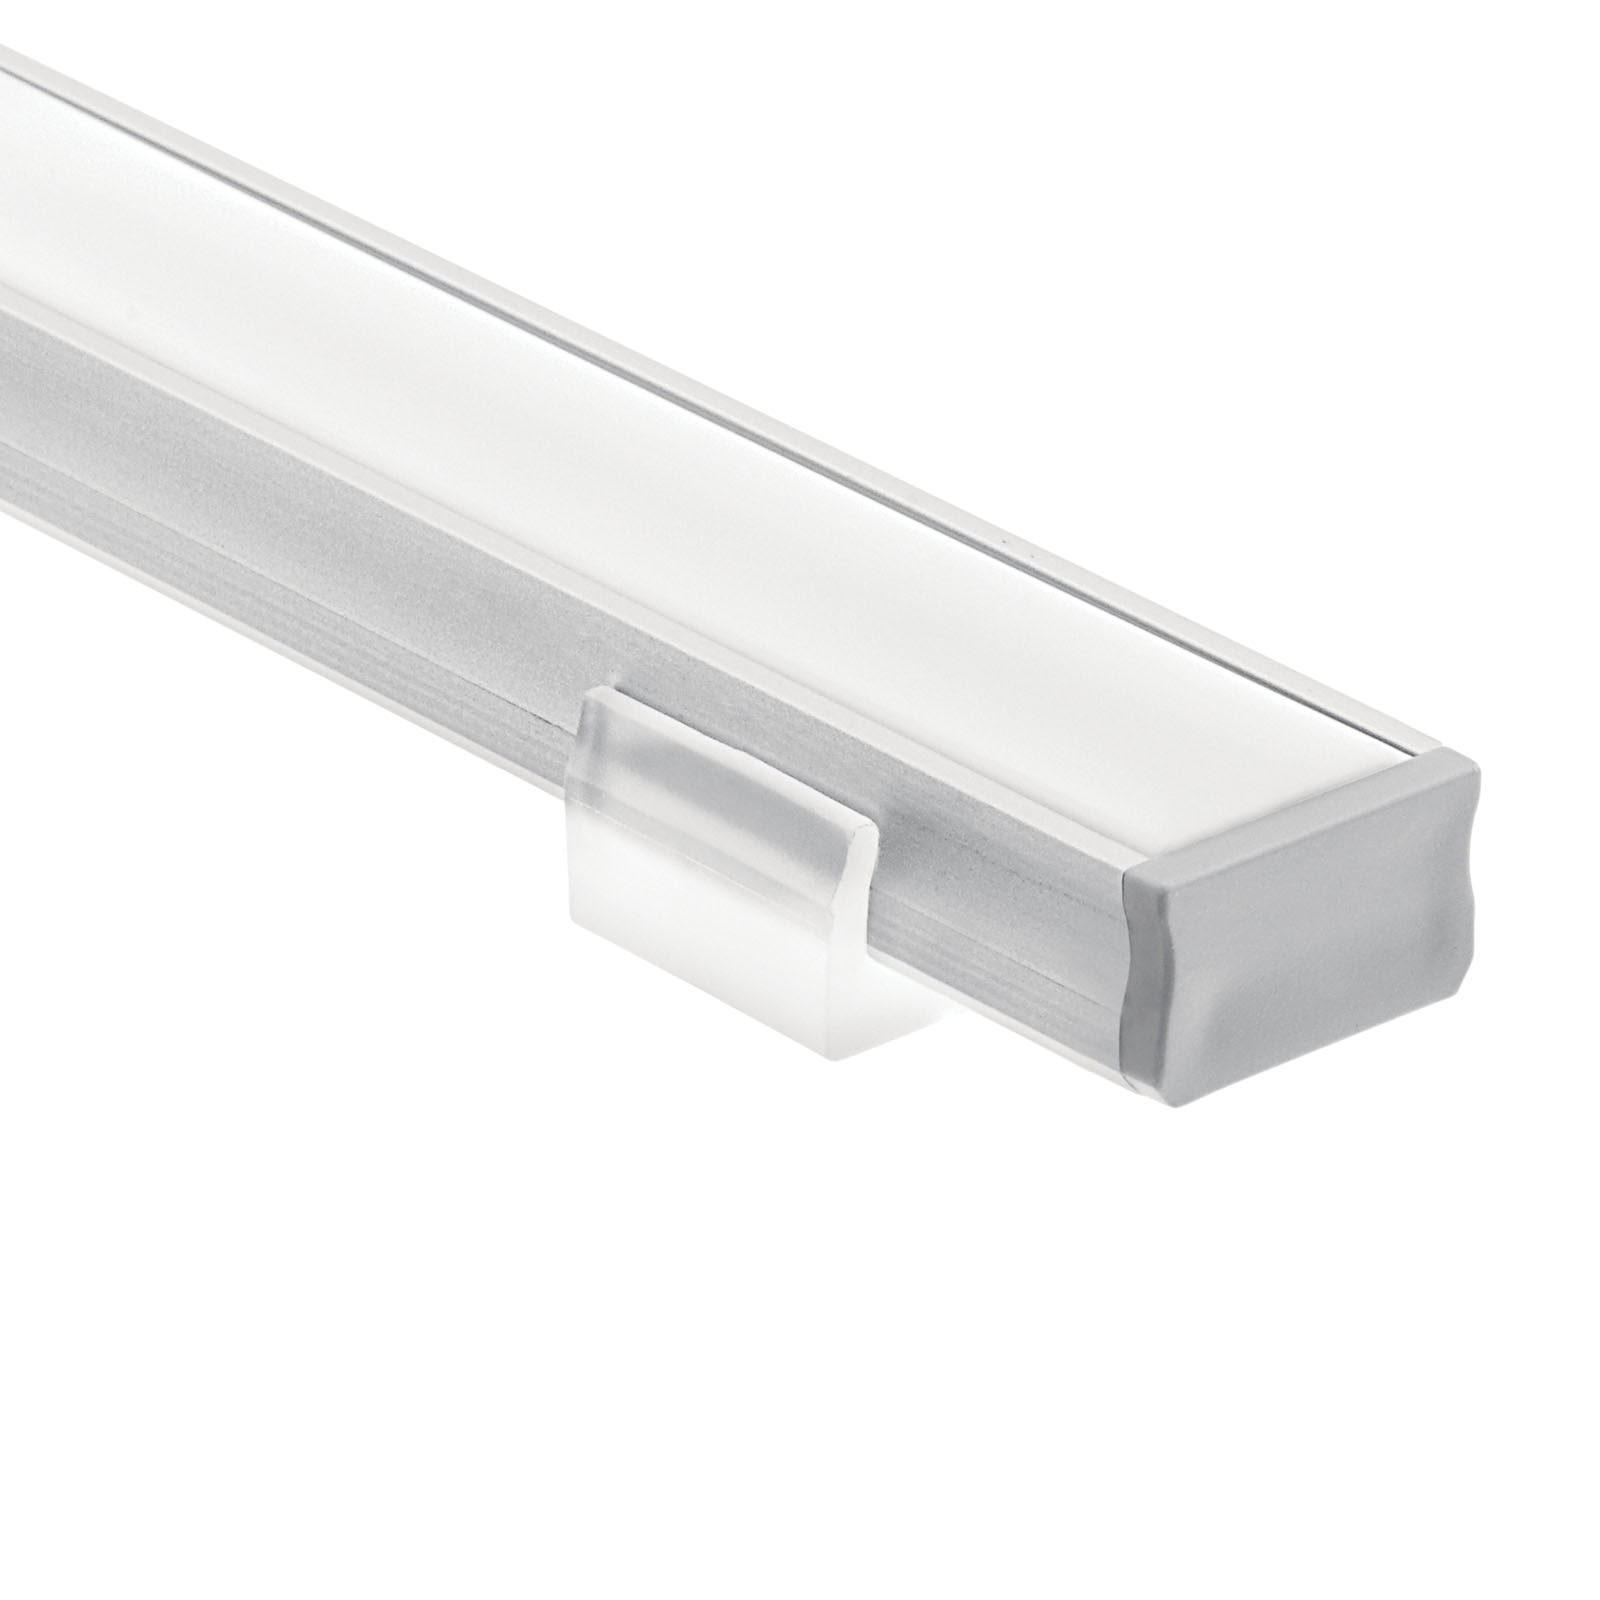 1TEK1STSF2SIL 783927559362 Mount LED tape light to surfaces like shelves and cabinets with the TE Standard  Series aluminum extruded channel kit. The kit comes equipped with 2 feet of channel and white opaque lens, as well as coordinating end caps and mounting clips. The standard depth of the channel offers a light distribution that is gently diffused. Simply add the Kichler LED Tape, Power Supply and accessories best suited for your installation.